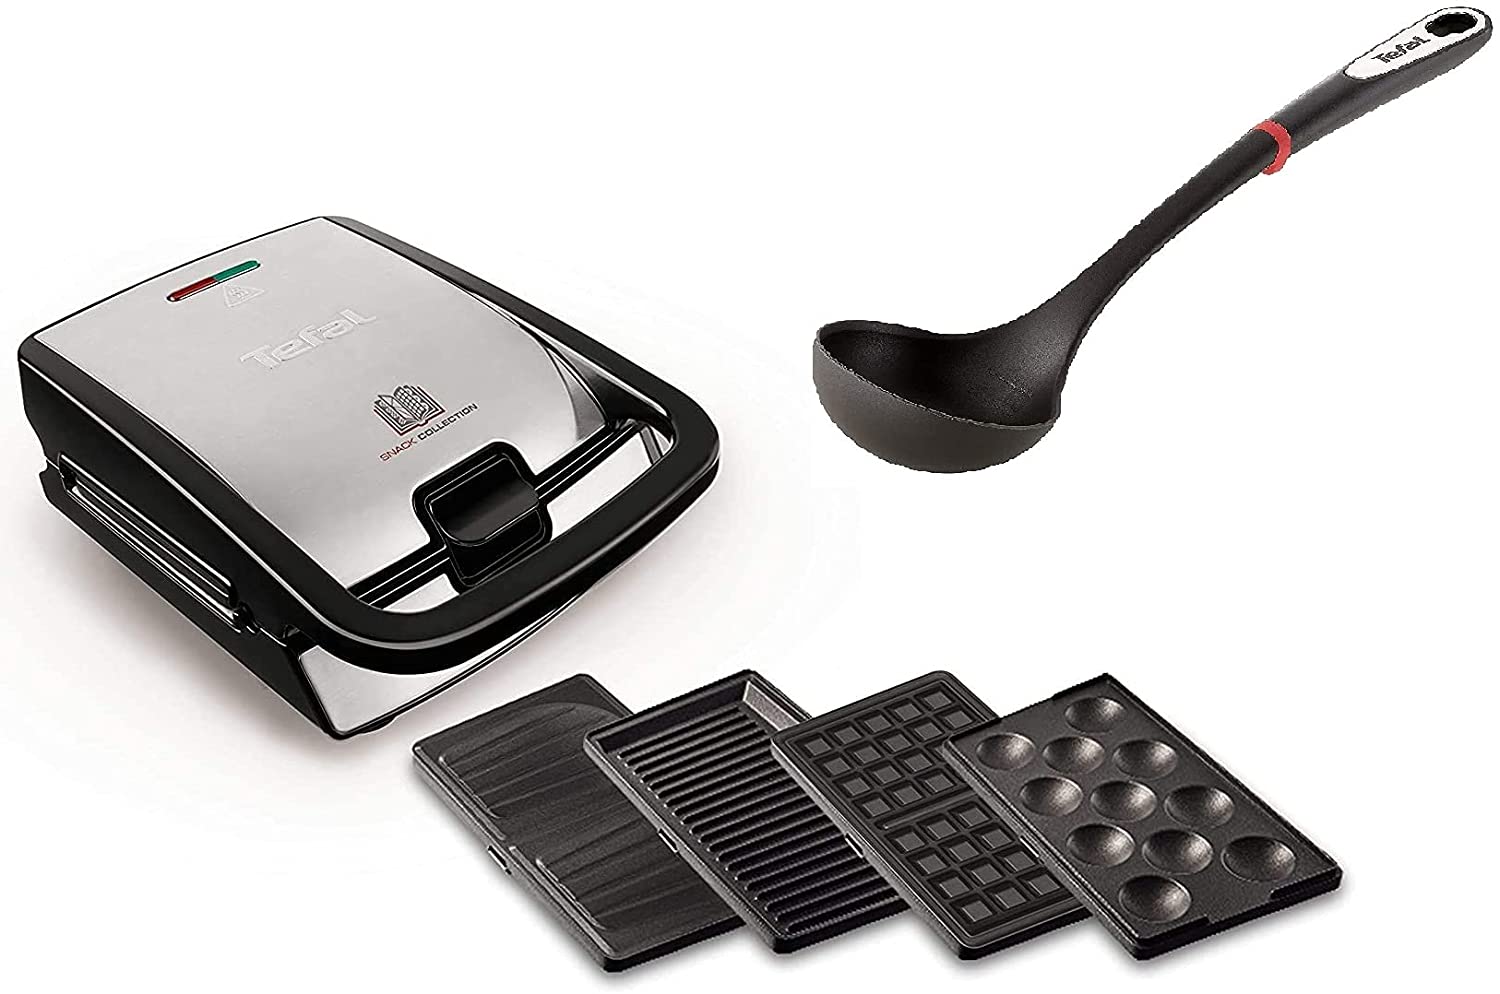 Tefal Snack Collection 2-in-1 Combination Device (Sandwich Toaster Waffle Iron + Soup Ladle), Dishwasher Safe & Removable Plates, Non-Stick Coating, 700 Watt, Black, Stainless Steel, Belgian